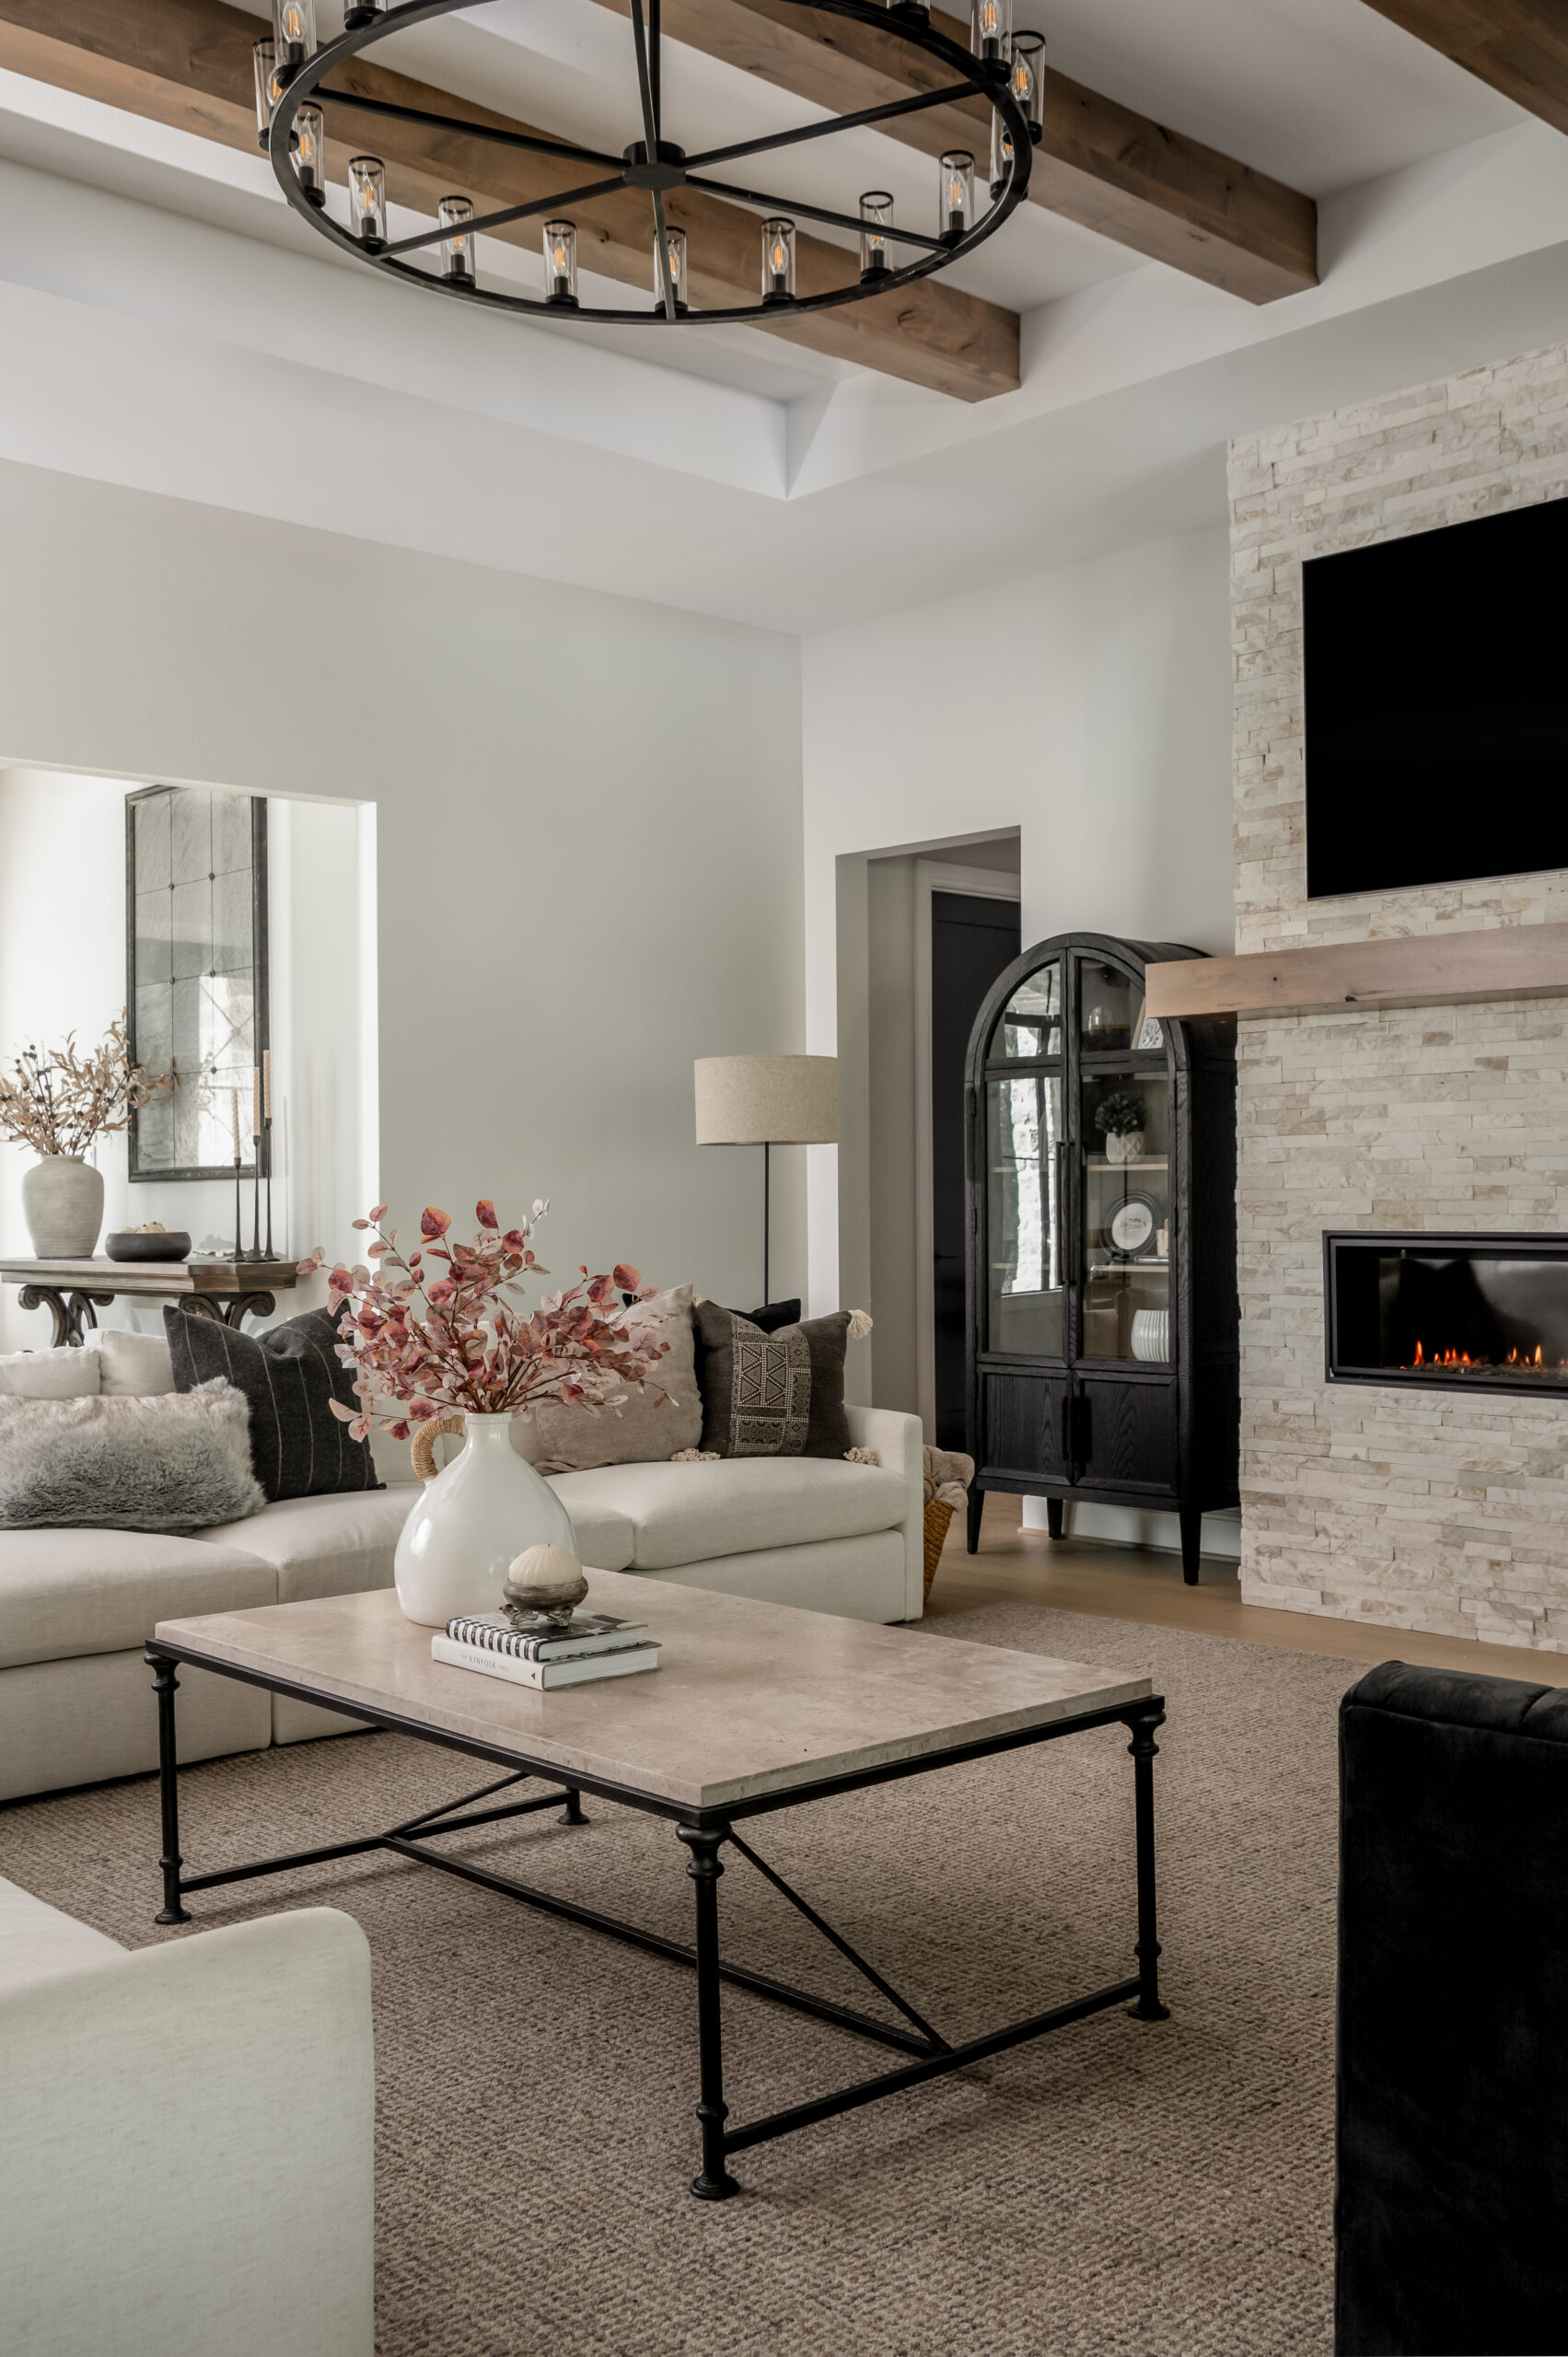 Living room interior design with brick fireplace and neutral furniture and decor